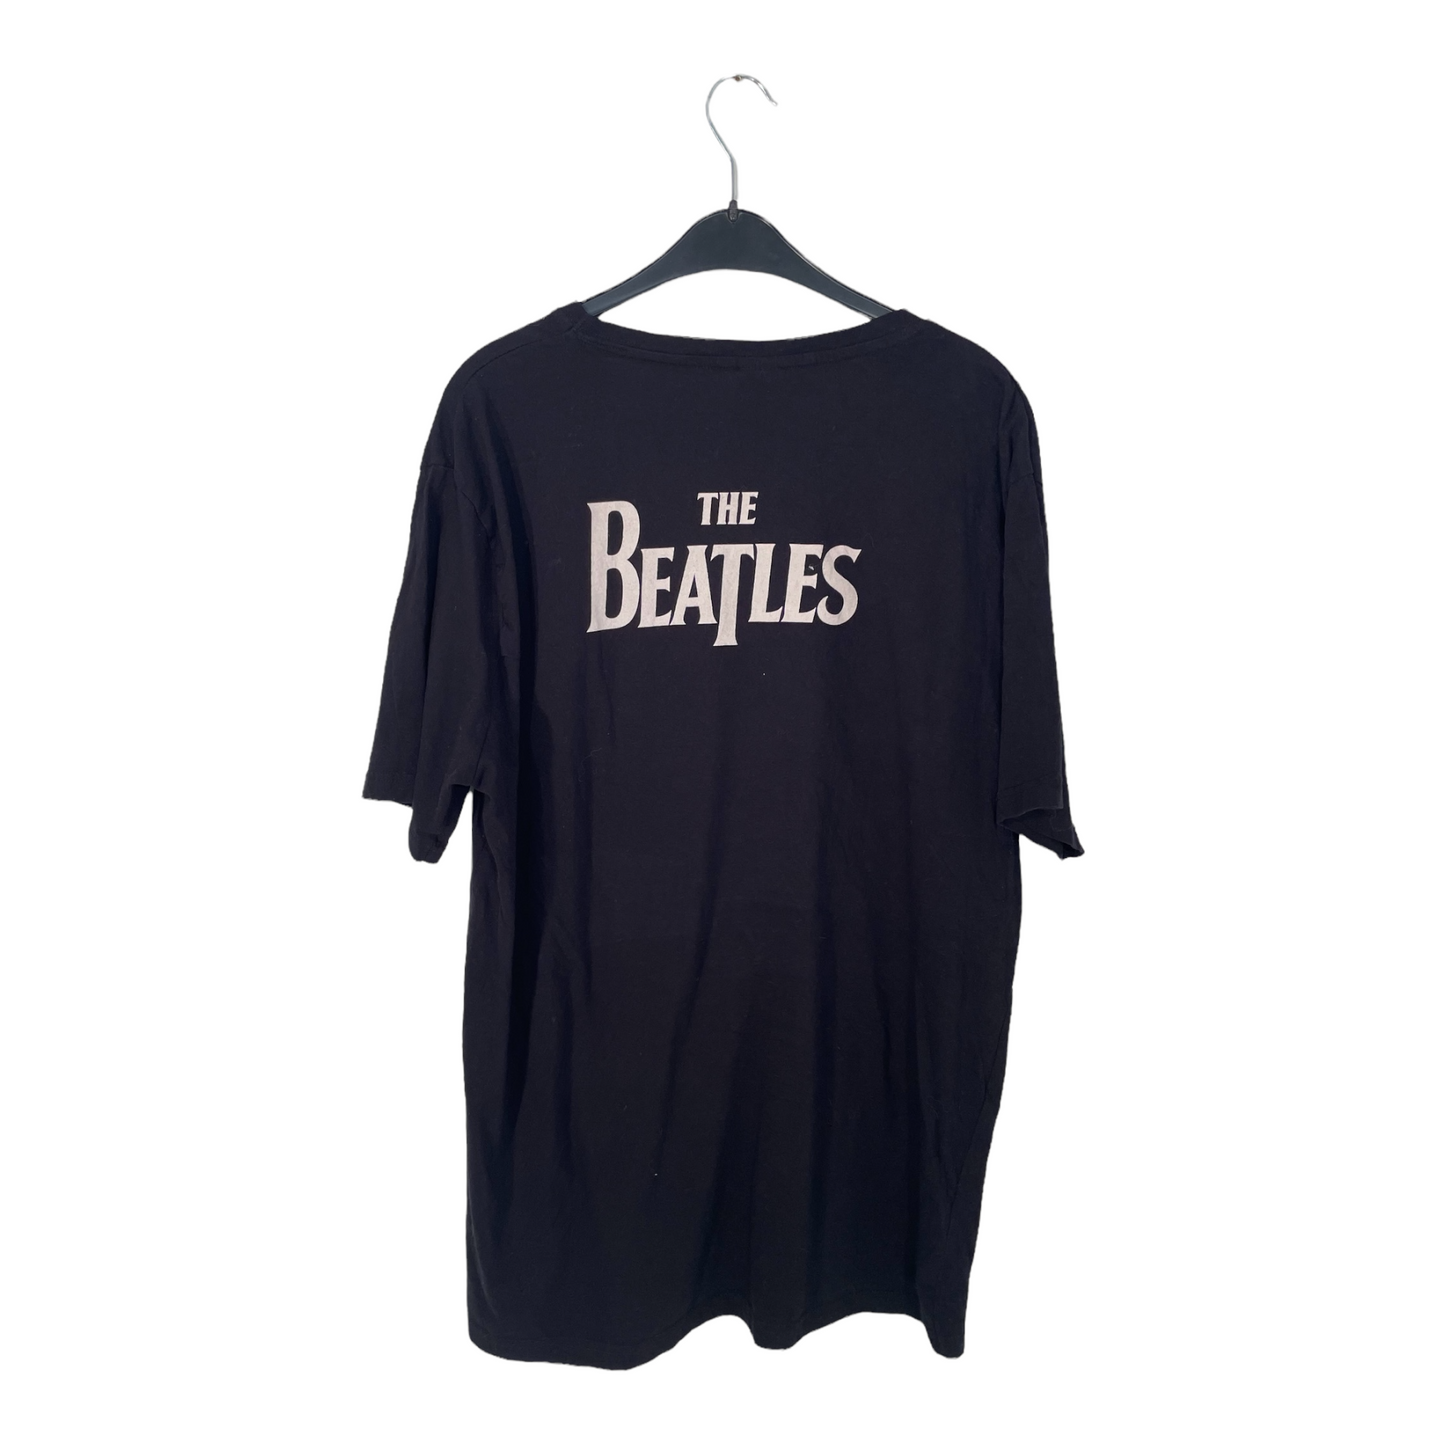 The Beatles “Let it Be” T-Shirt